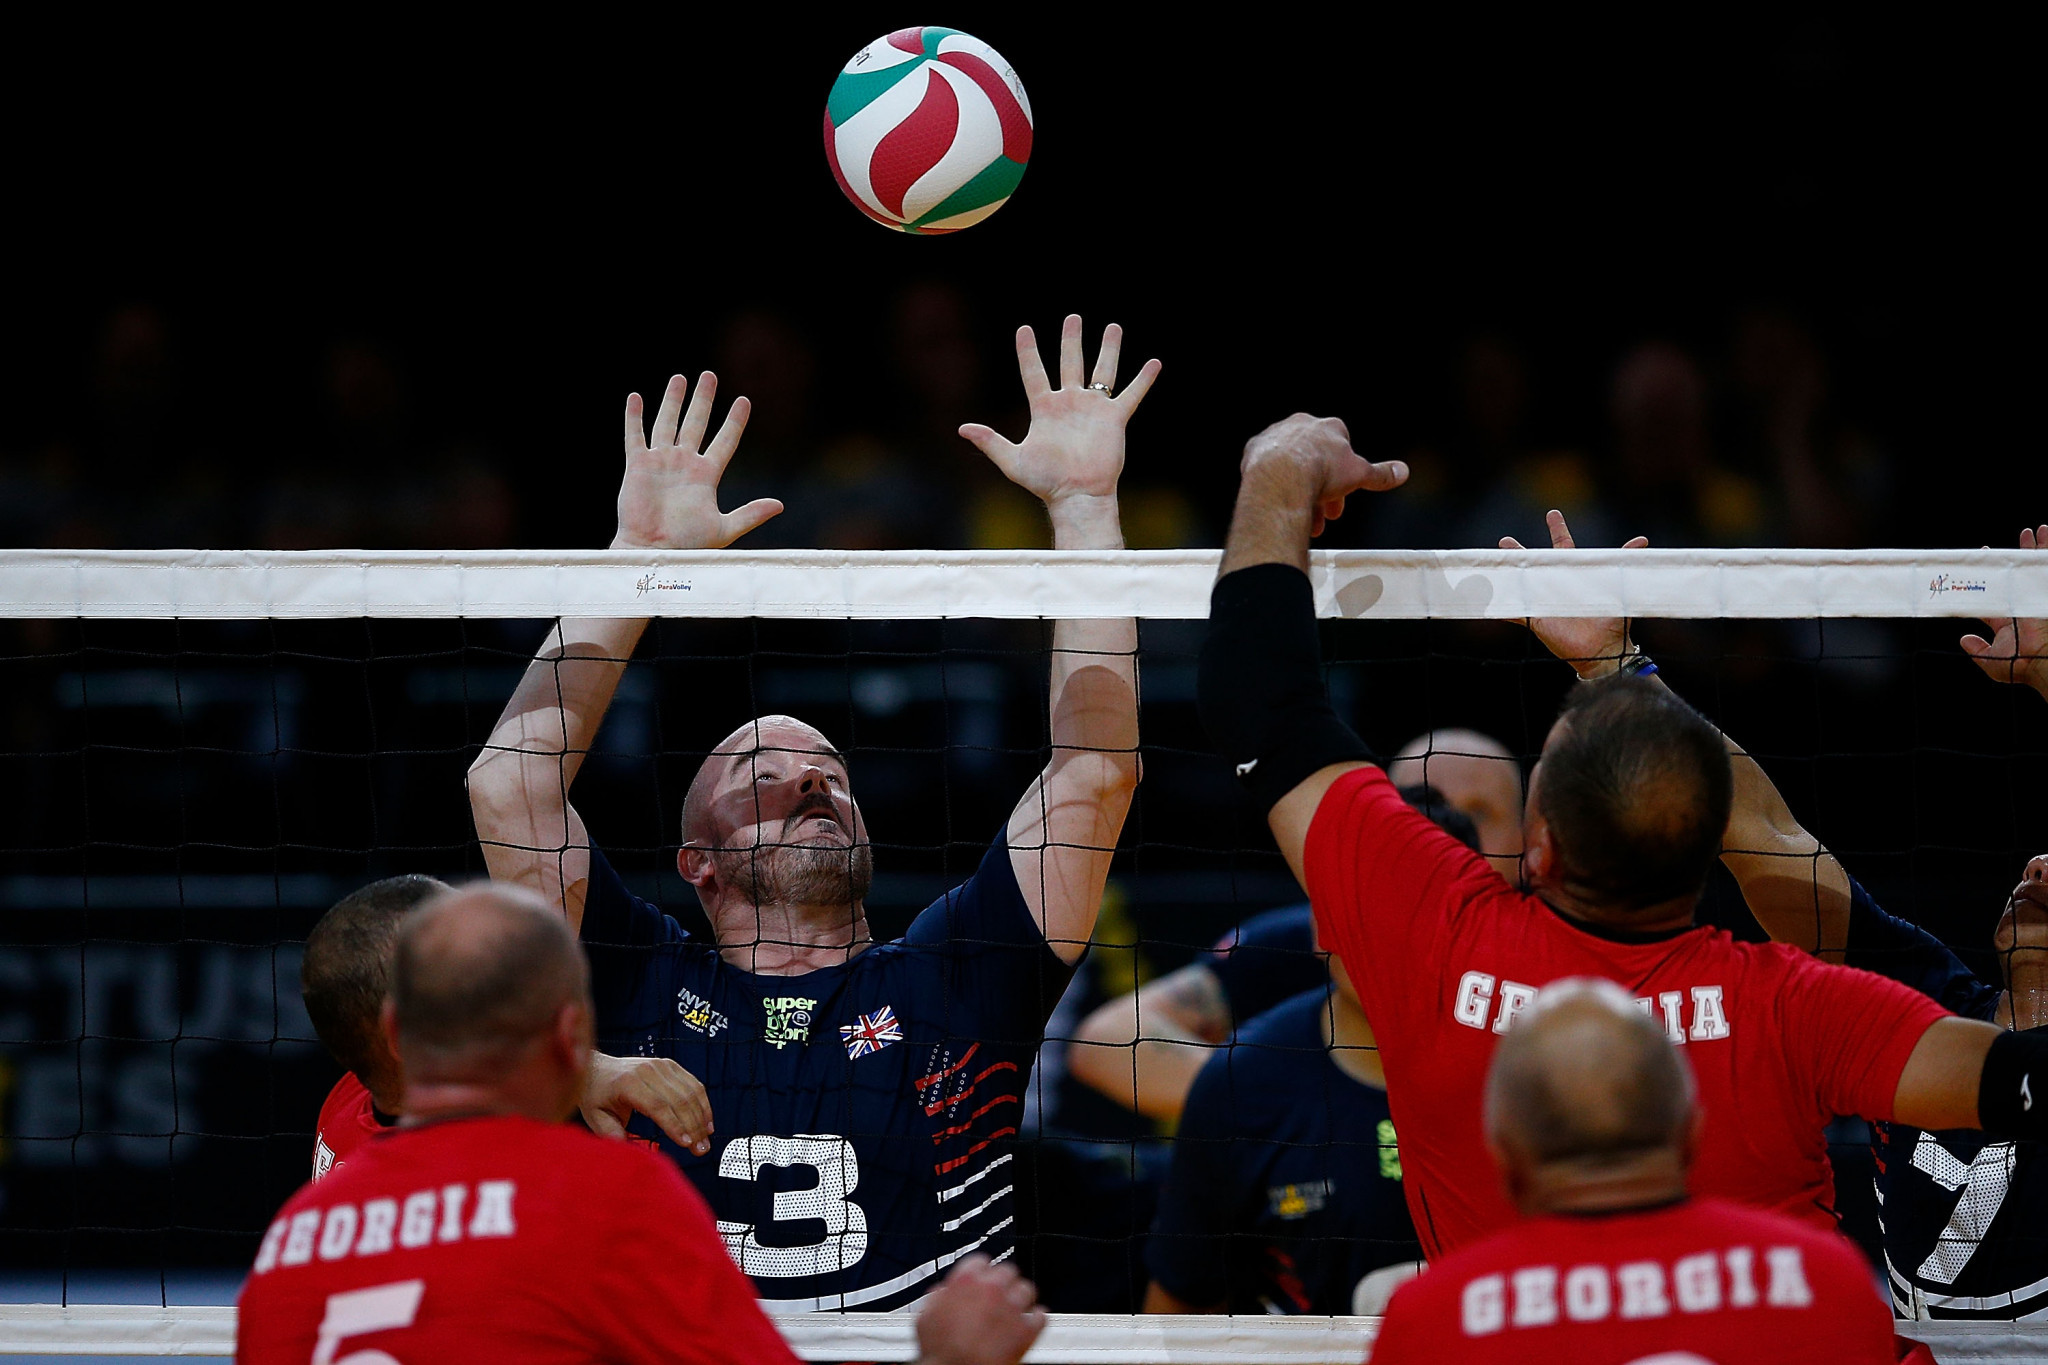 Georgia win sitting volleyball gold at 2018 Invictus Games 